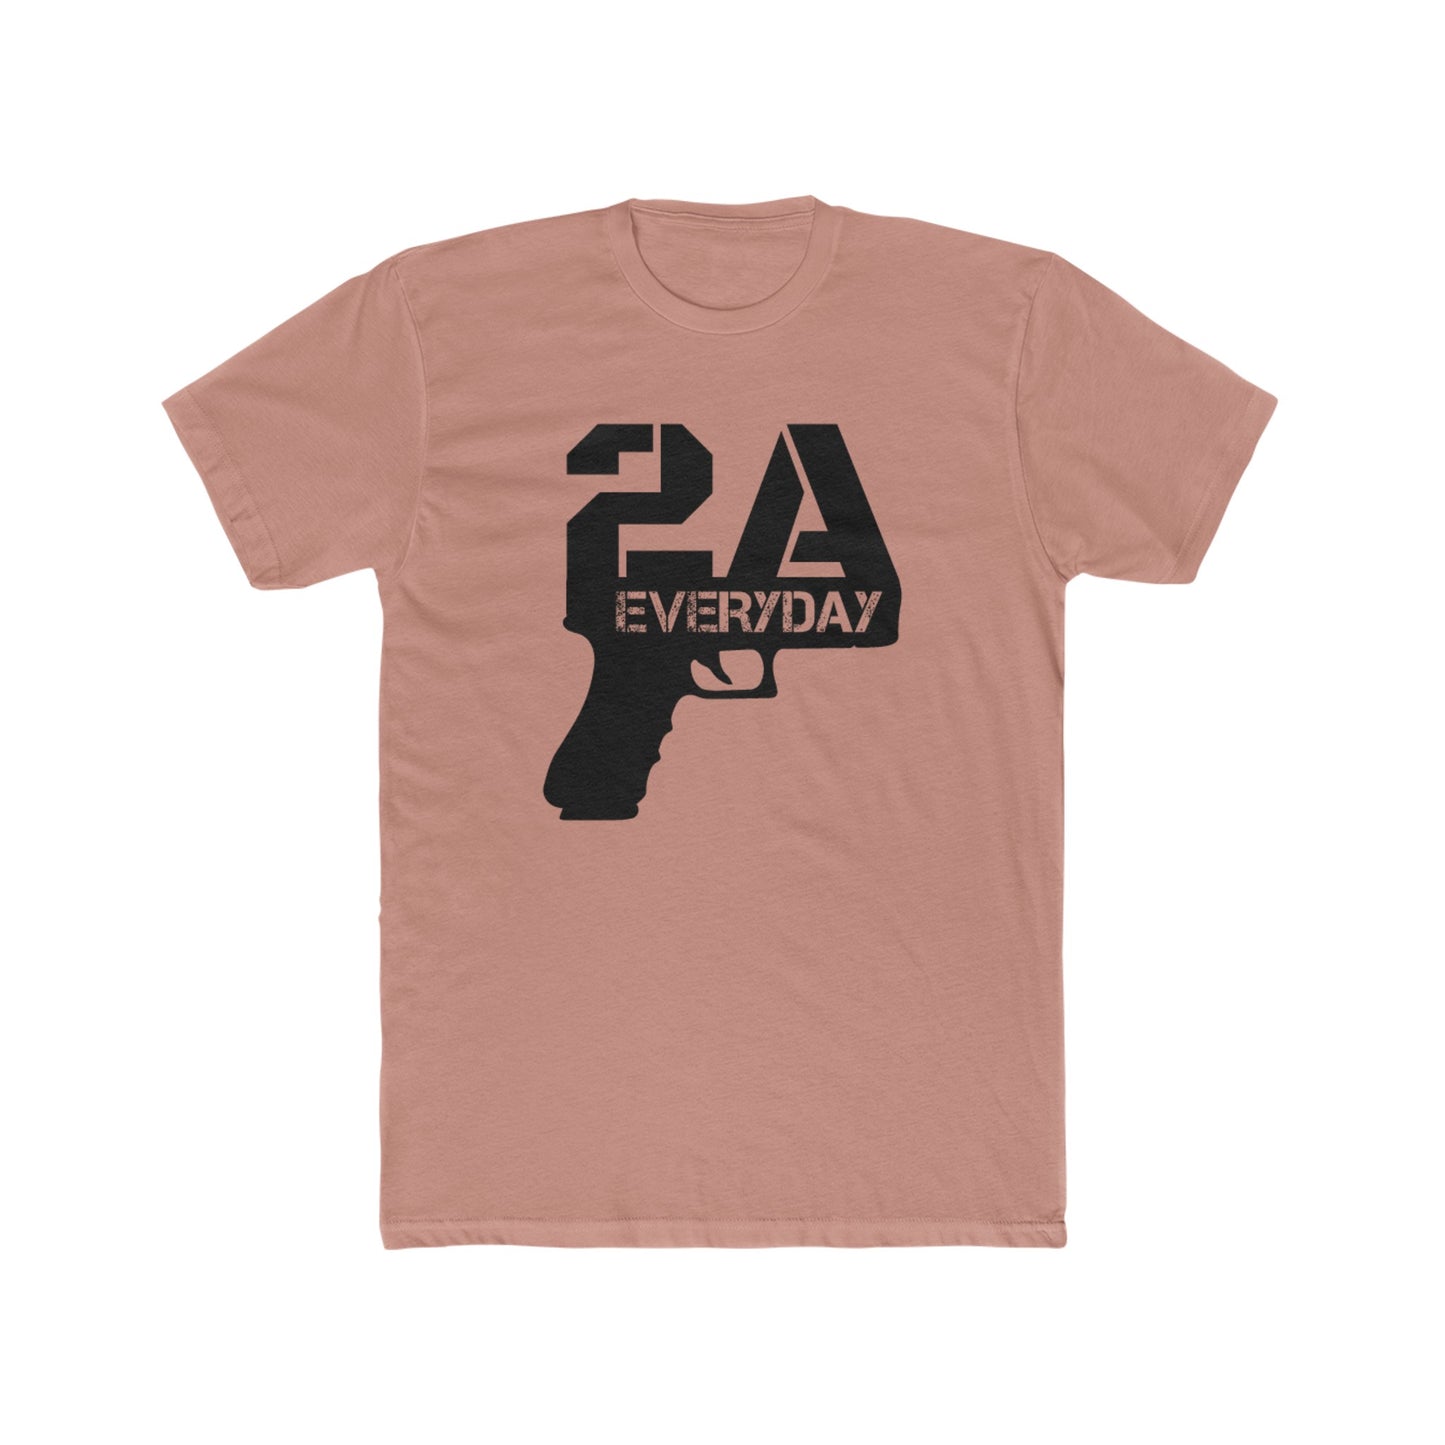 2A Everyday Blended Tee